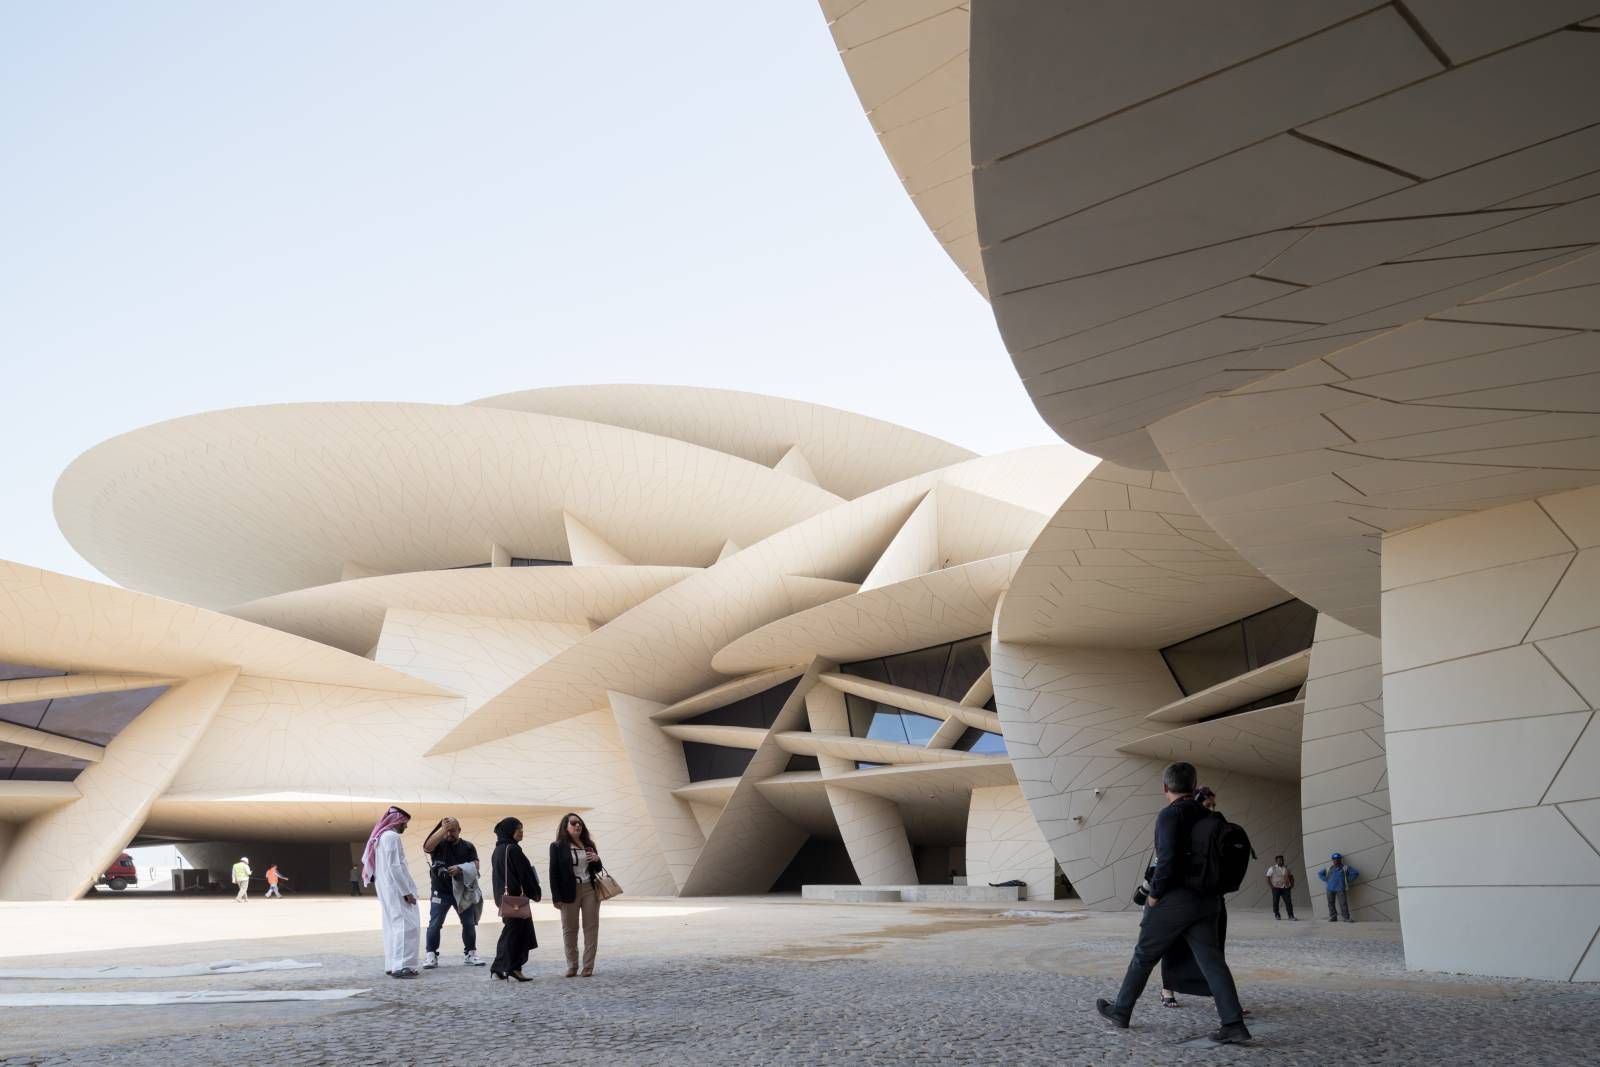 View of the many ‘discs’ of National Museum of Qatar